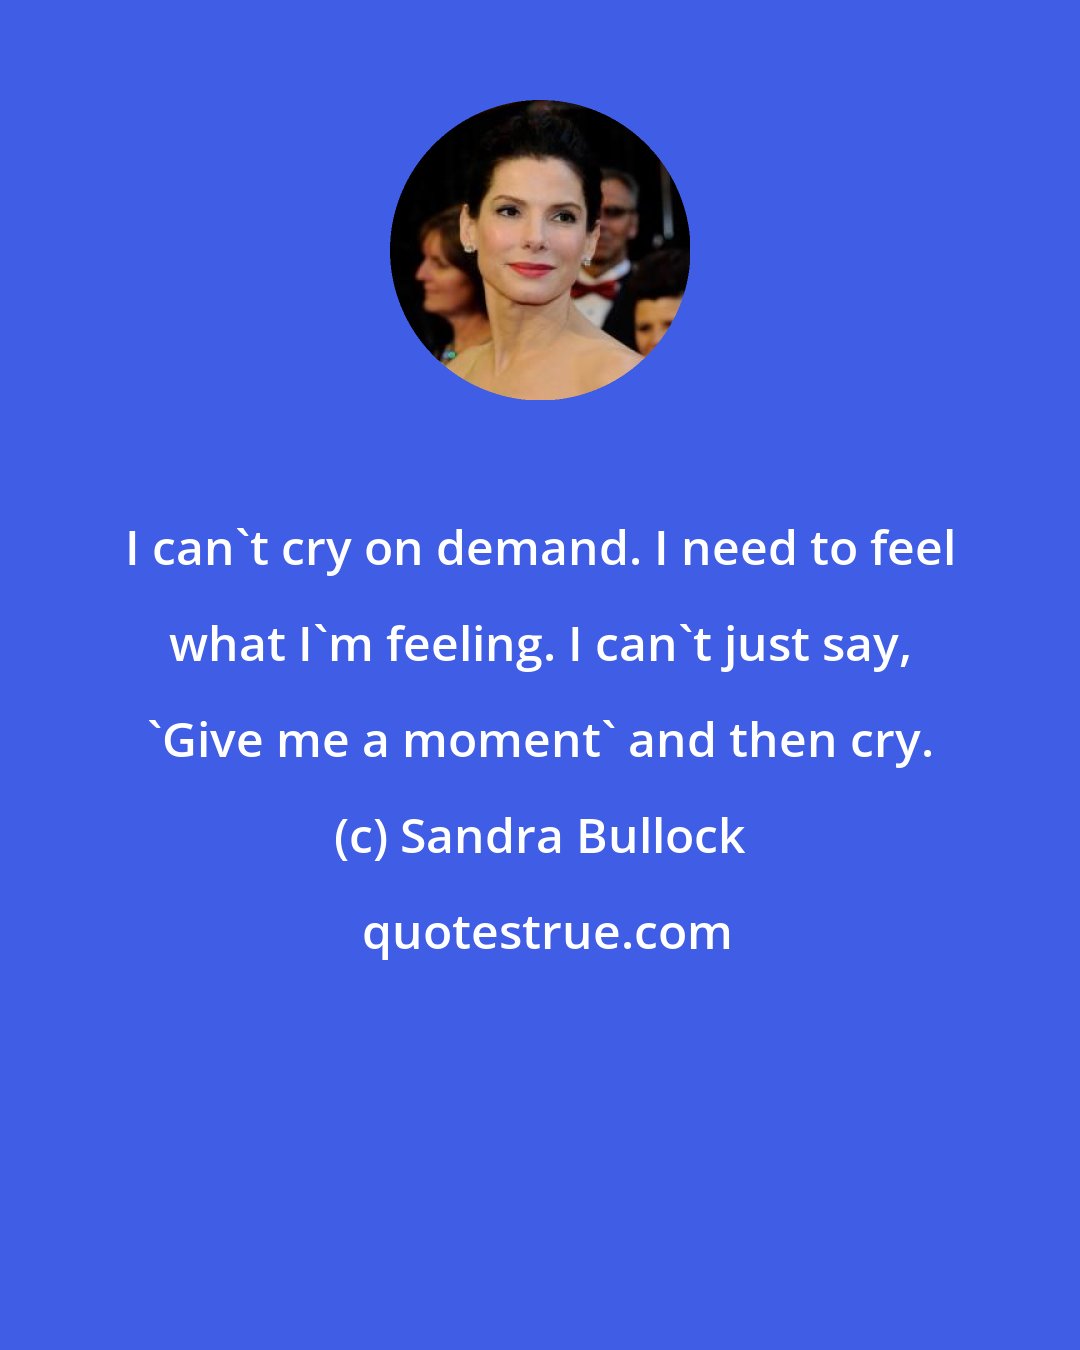 Sandra Bullock: I can't cry on demand. I need to feel what I'm feeling. I can't just say, 'Give me a moment' and then cry.